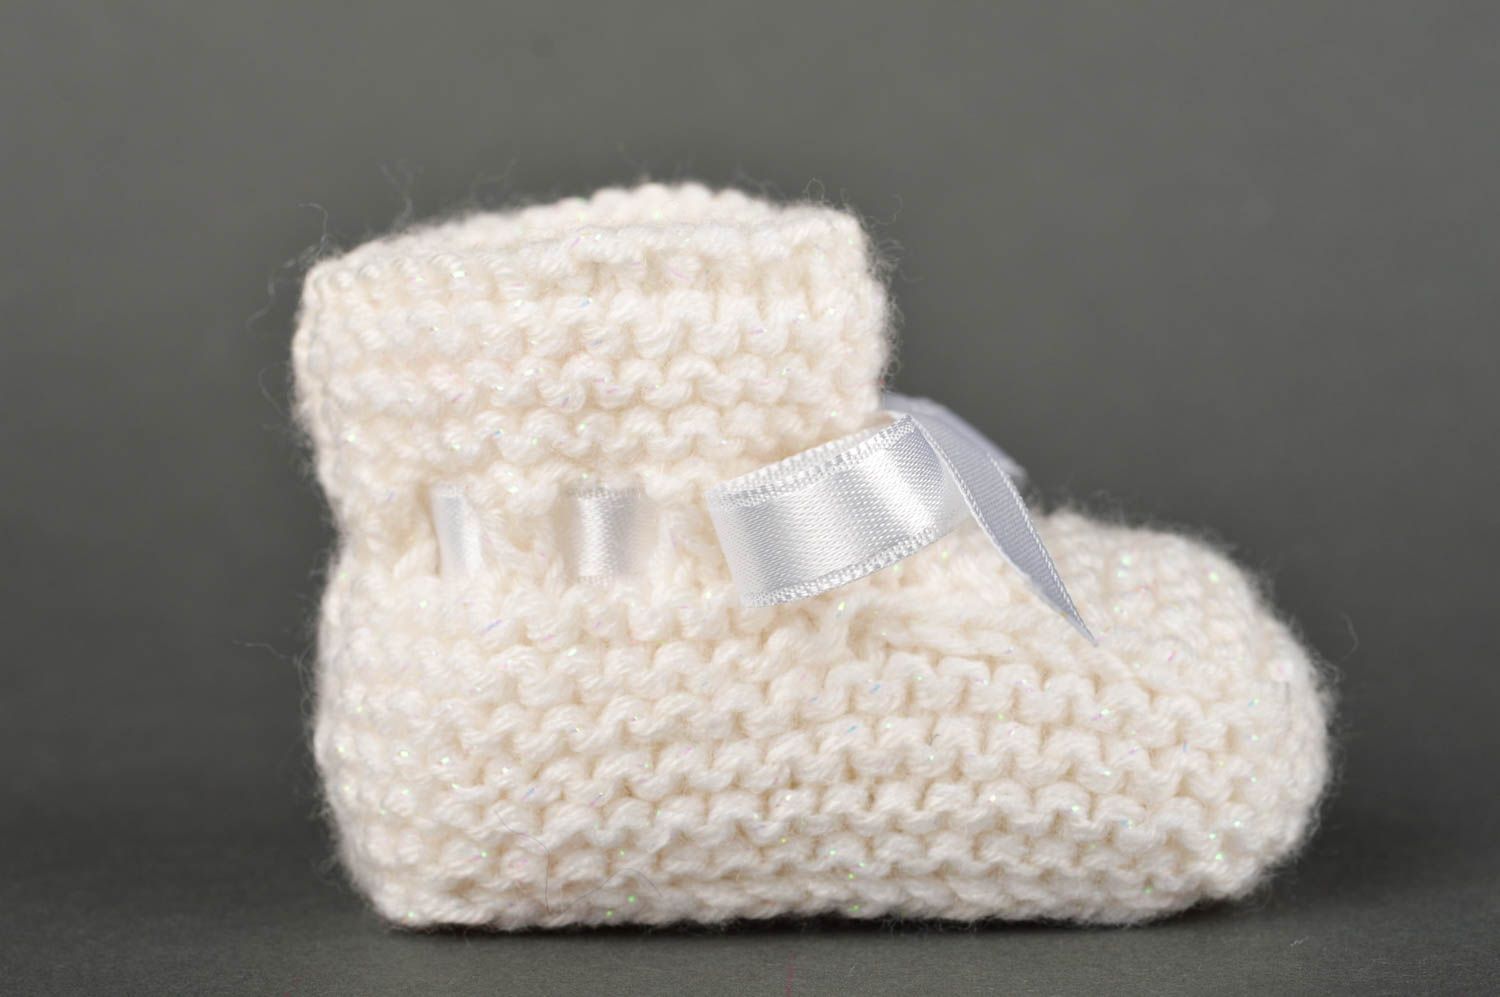 Handmade crocheted baby bootees cute socks for kids warm baby clothes photo 3